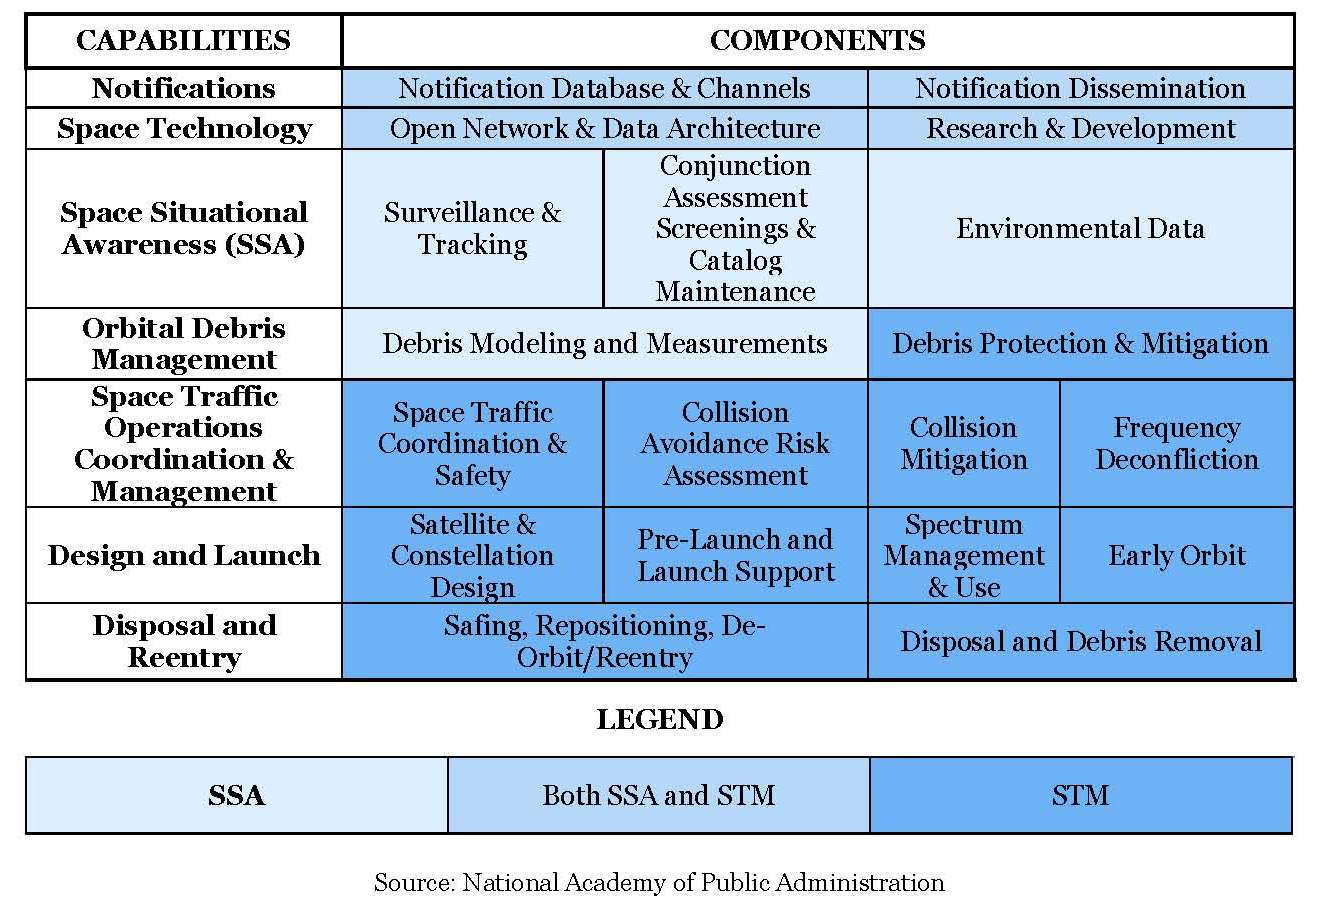 Capabilities essential to performing the SSA (space situational awareness) and STM (space traffic management) functions | National Academy of Public Administration